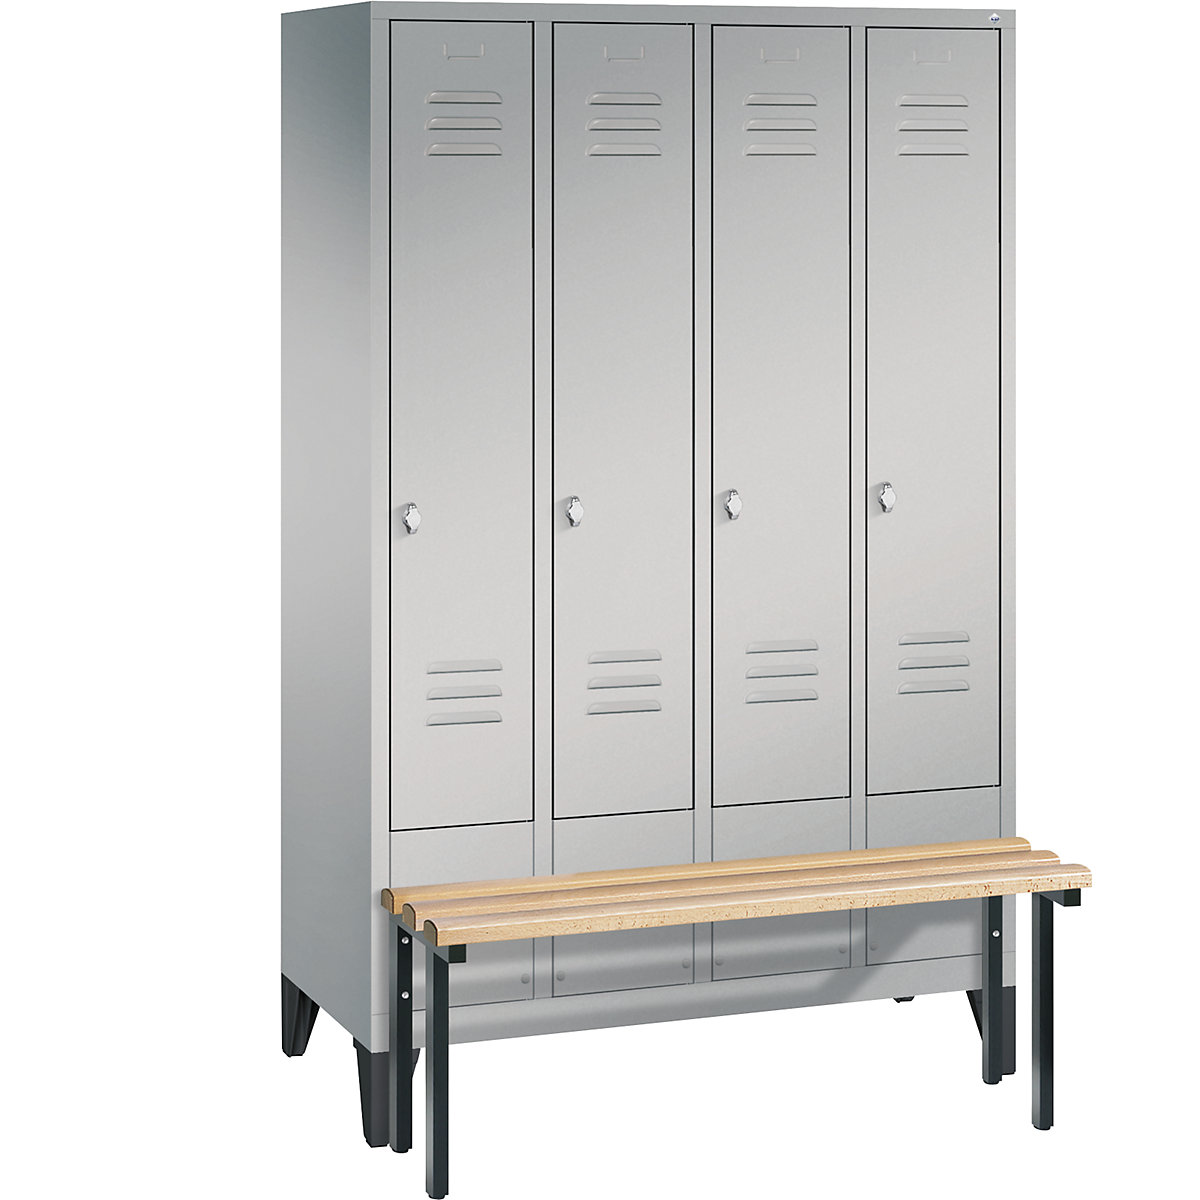 CLASSIC cloakroom locker with bench mounted in front – C+P, 4 compartments, compartment width 300 mm, white aluminium-4